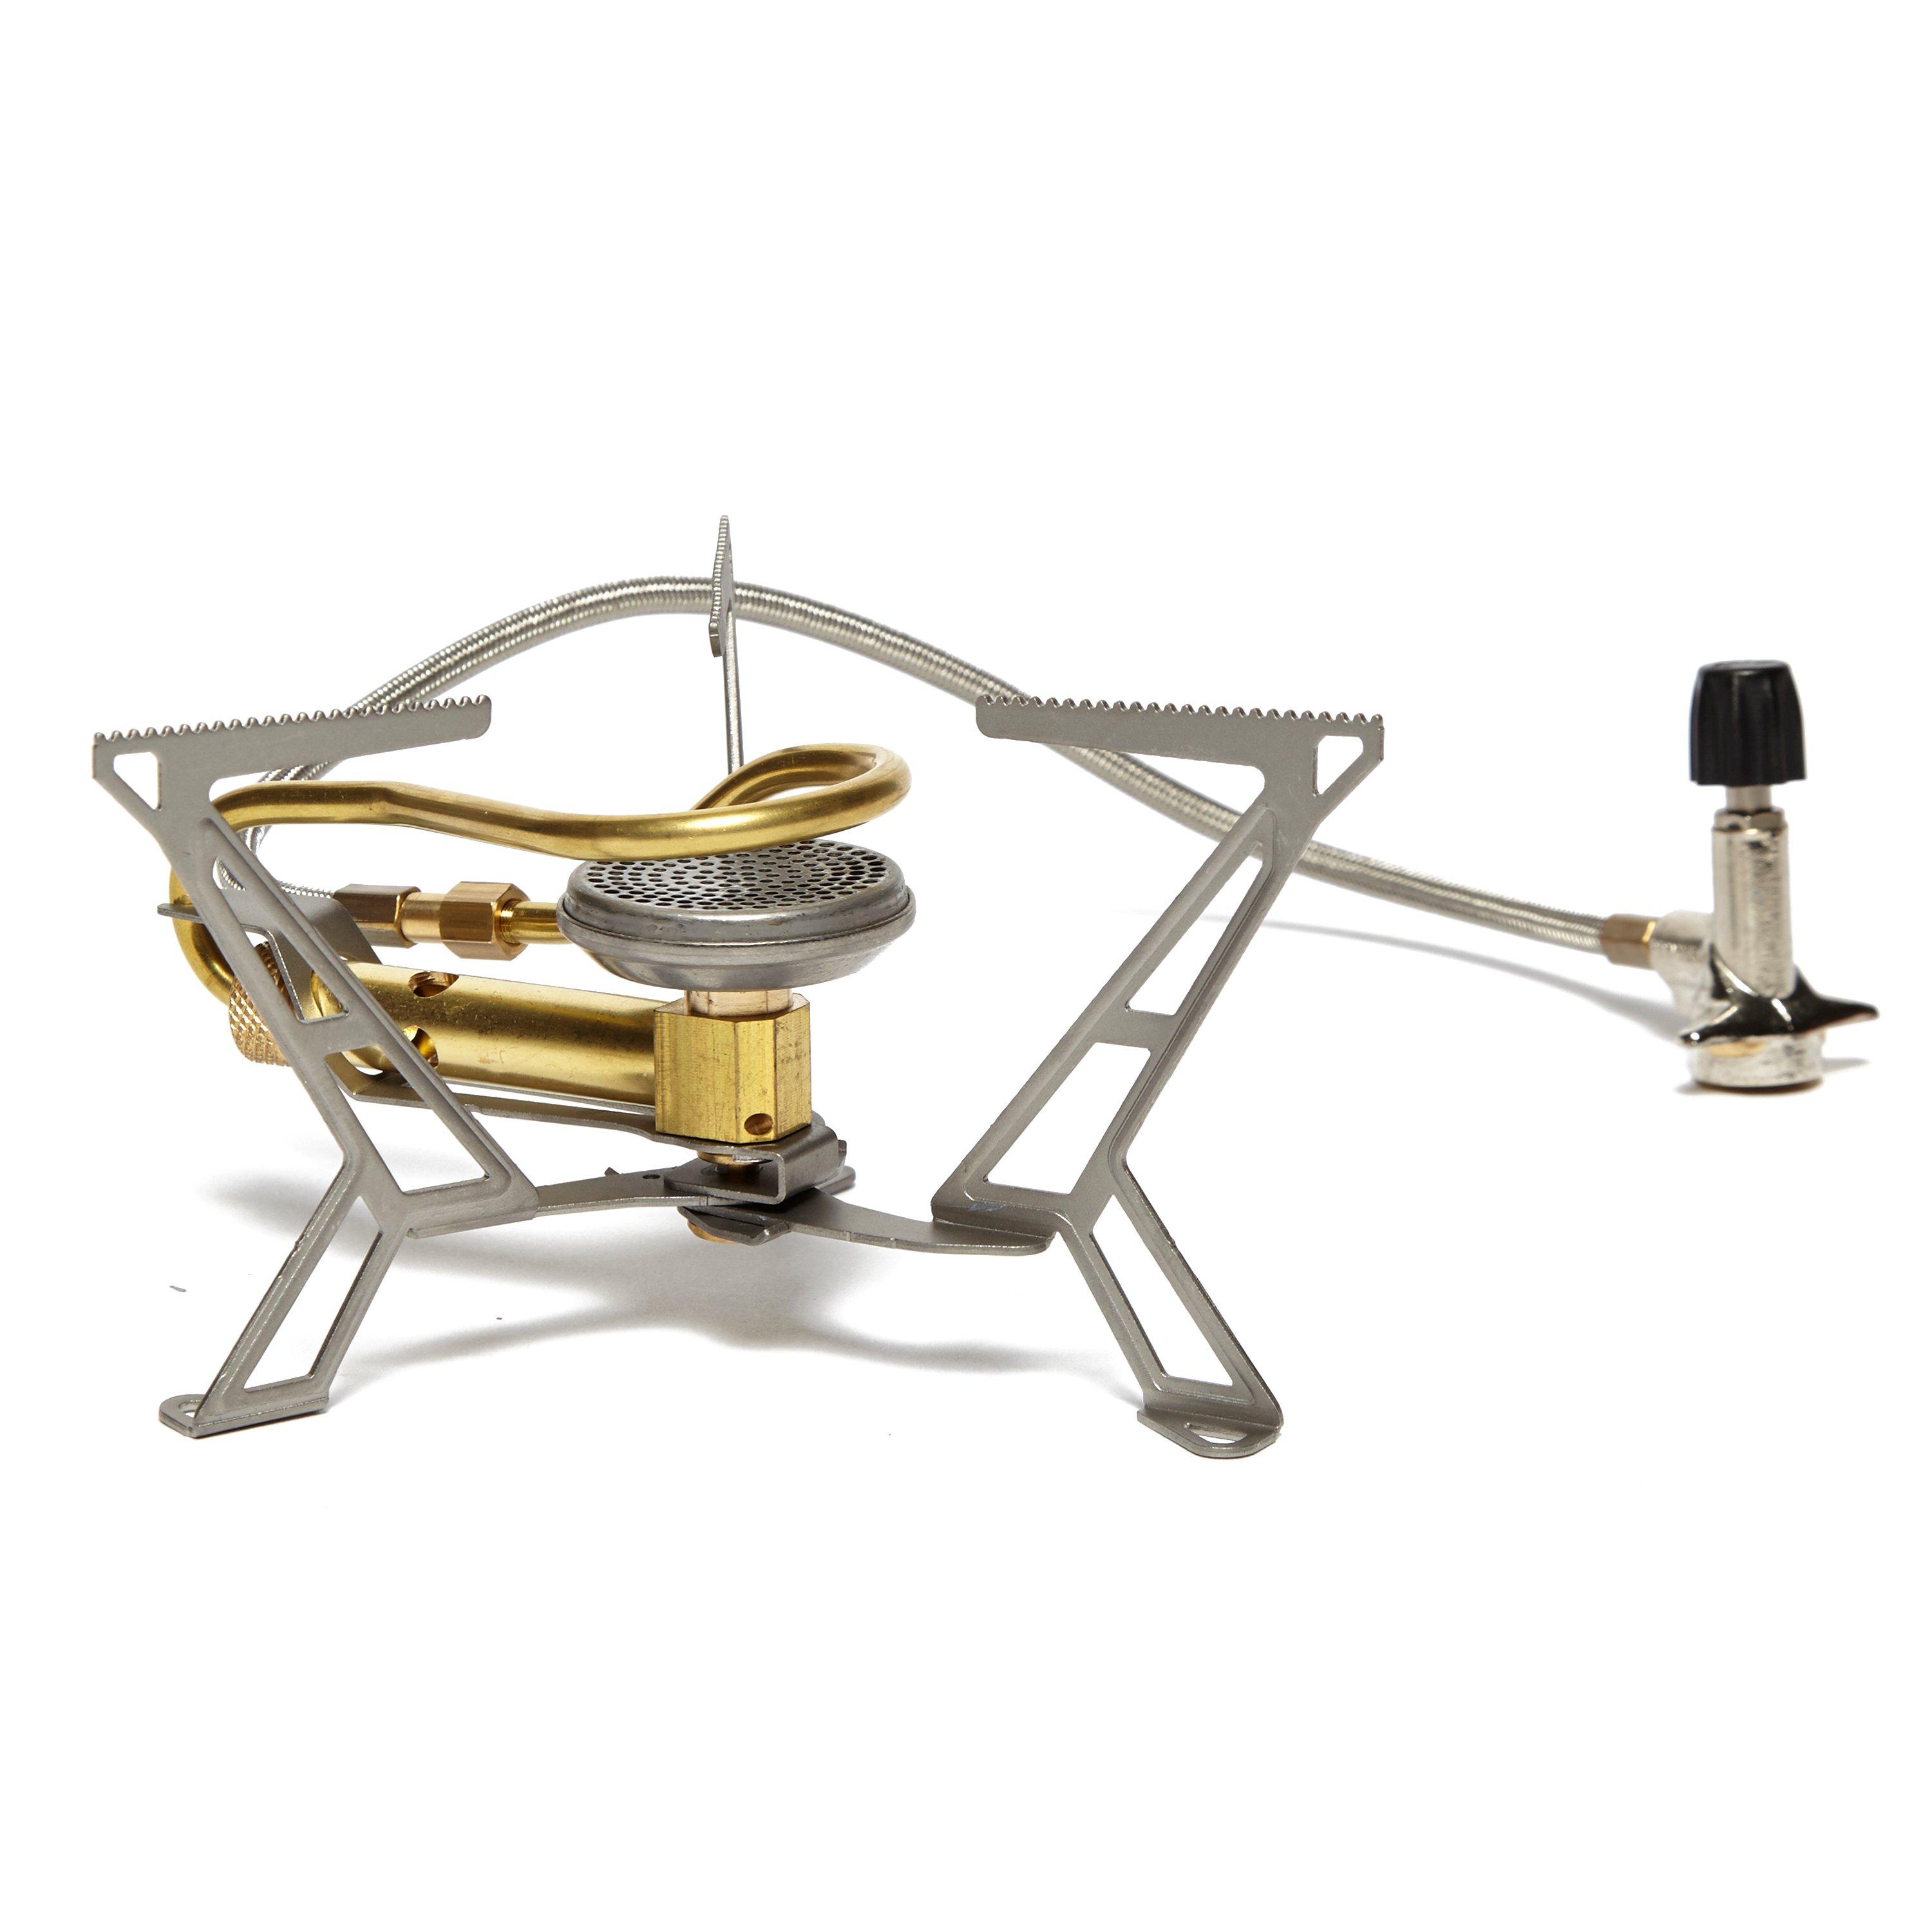 Primus Express Spider Ii Hose-mounted Gas Stove